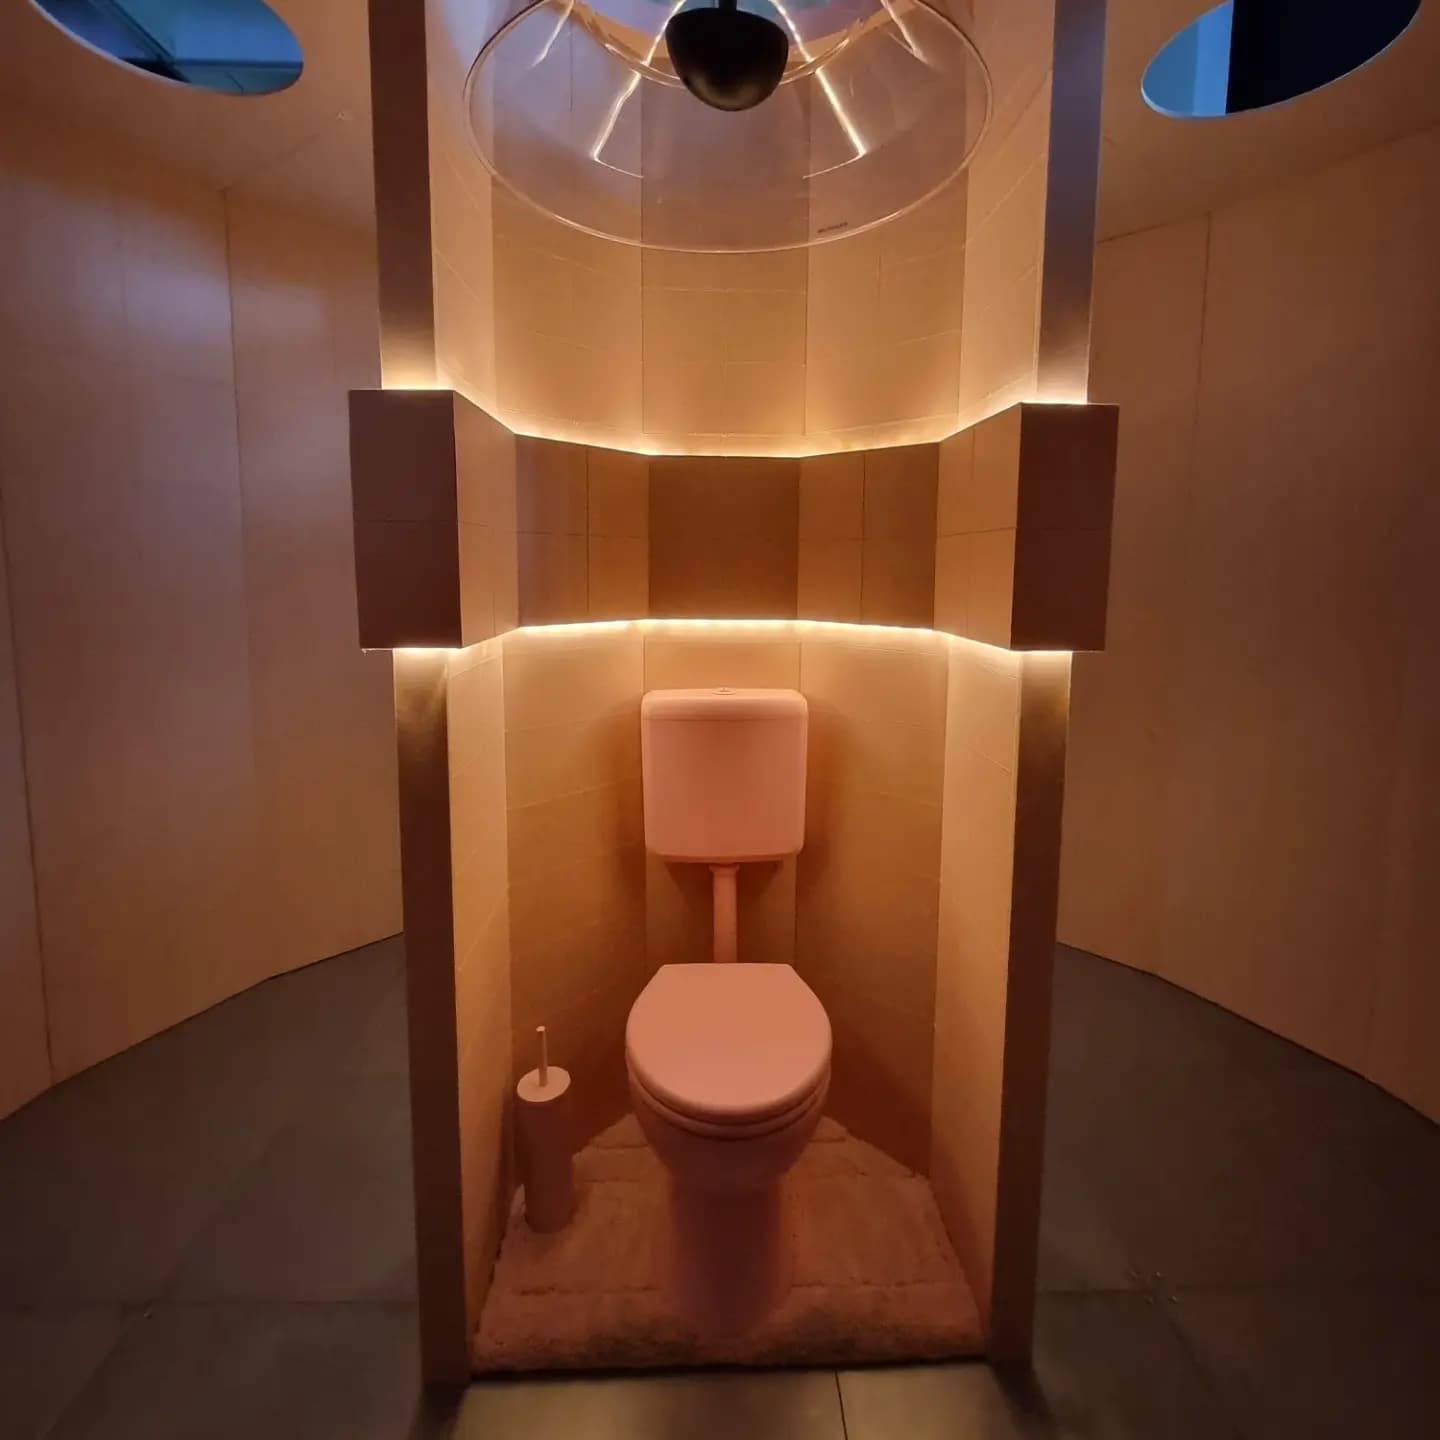 A pink toilet in a pink cubicle with soft, warm lighting